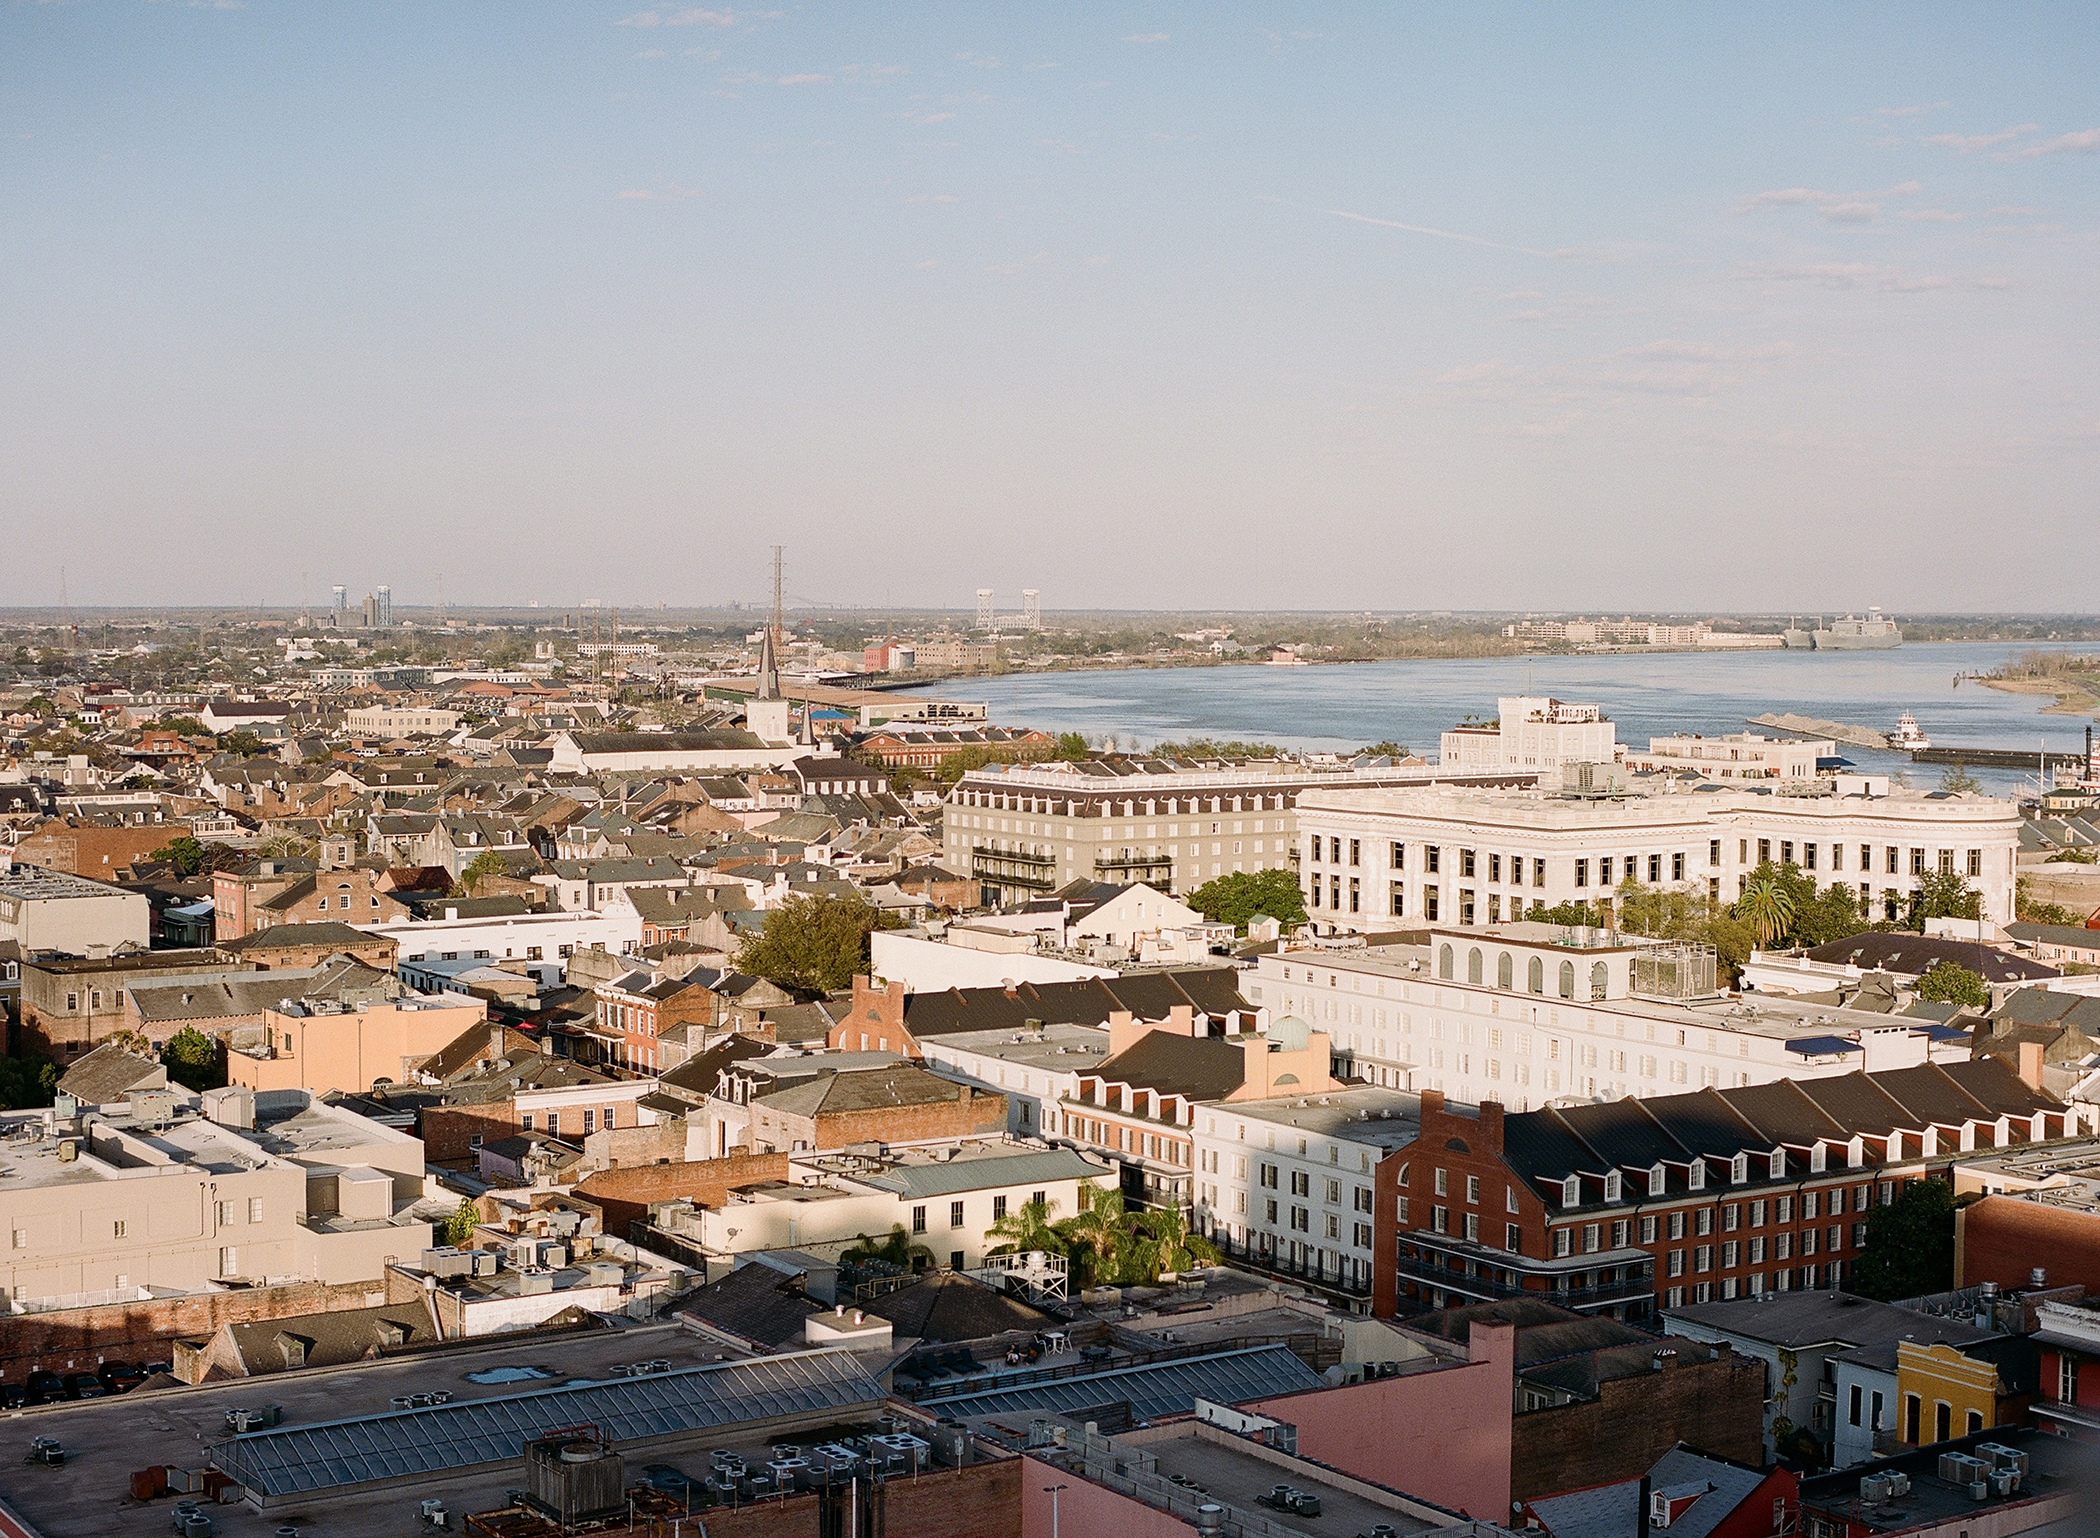 Aerial view of New Orleans showcasing historical buildings and the Mississippi River in the distance.